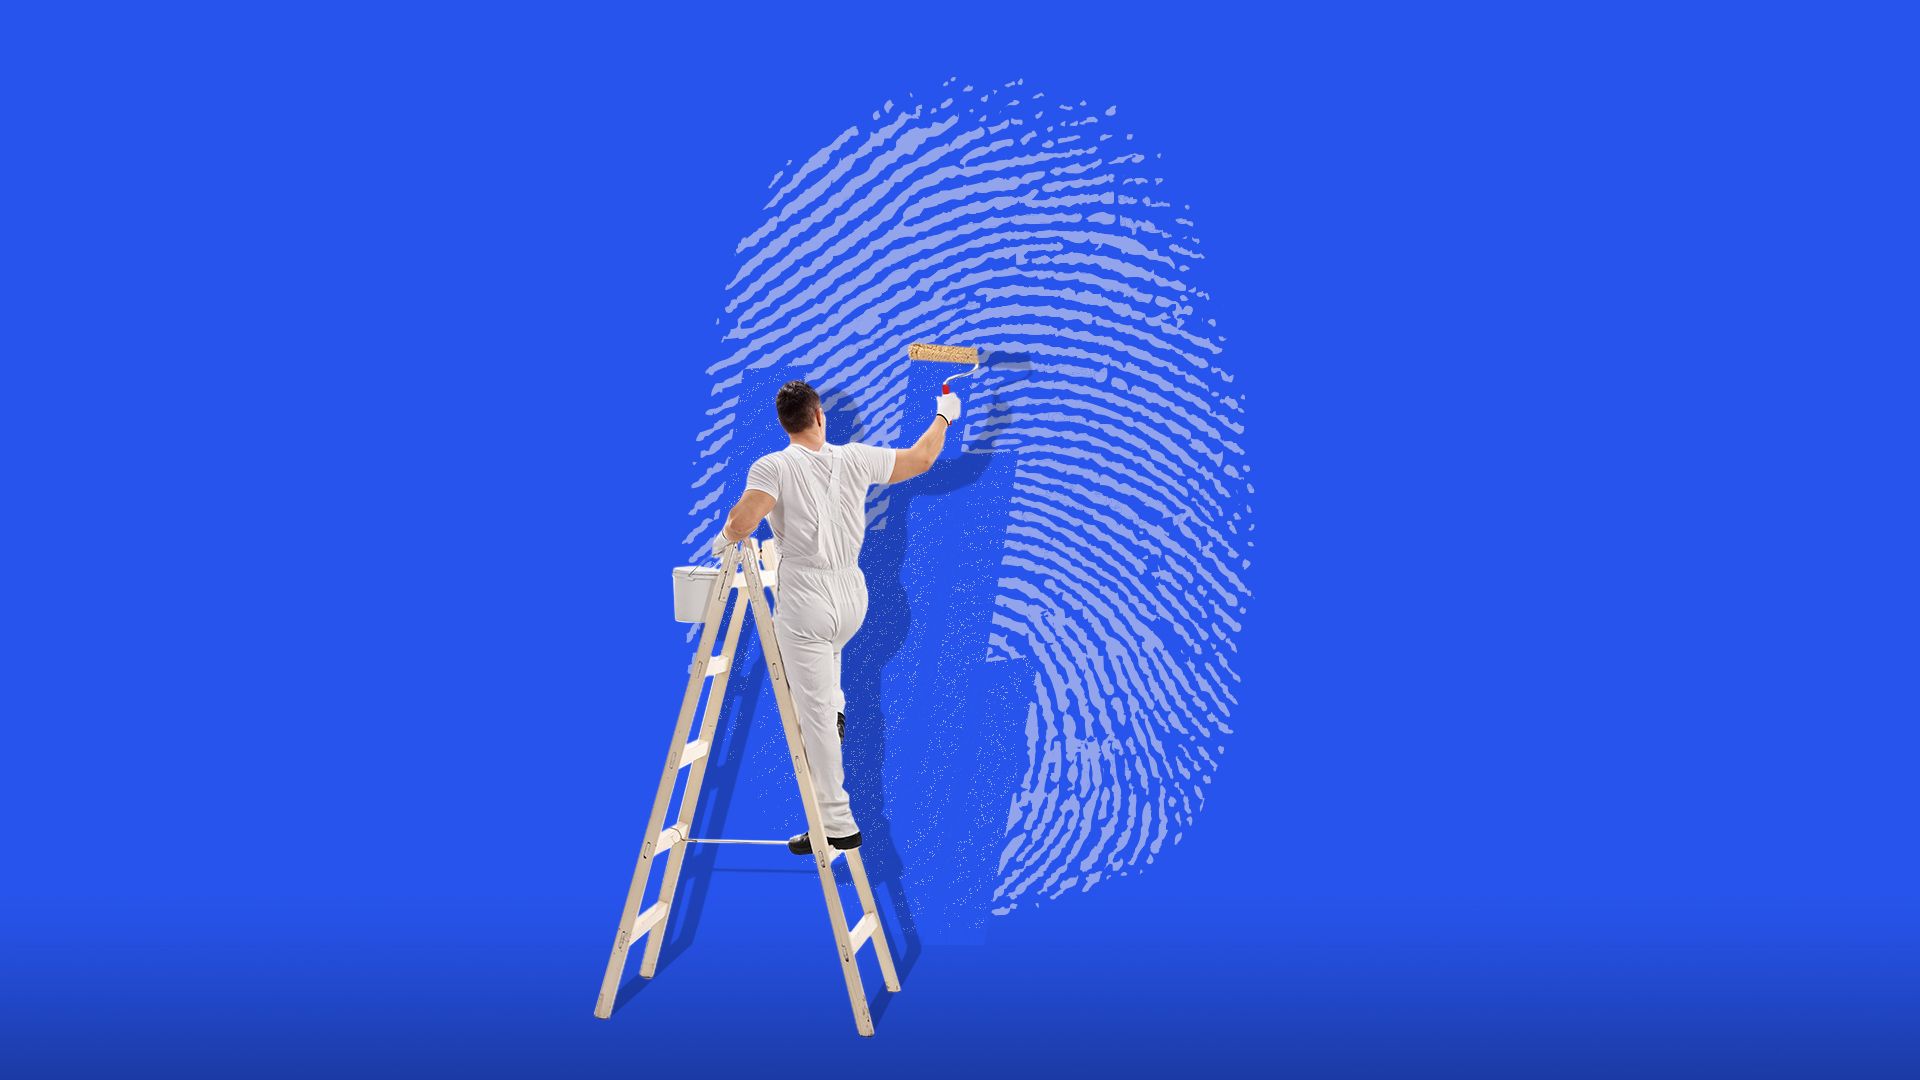 Illustration of a giant thumbprint being painted over.